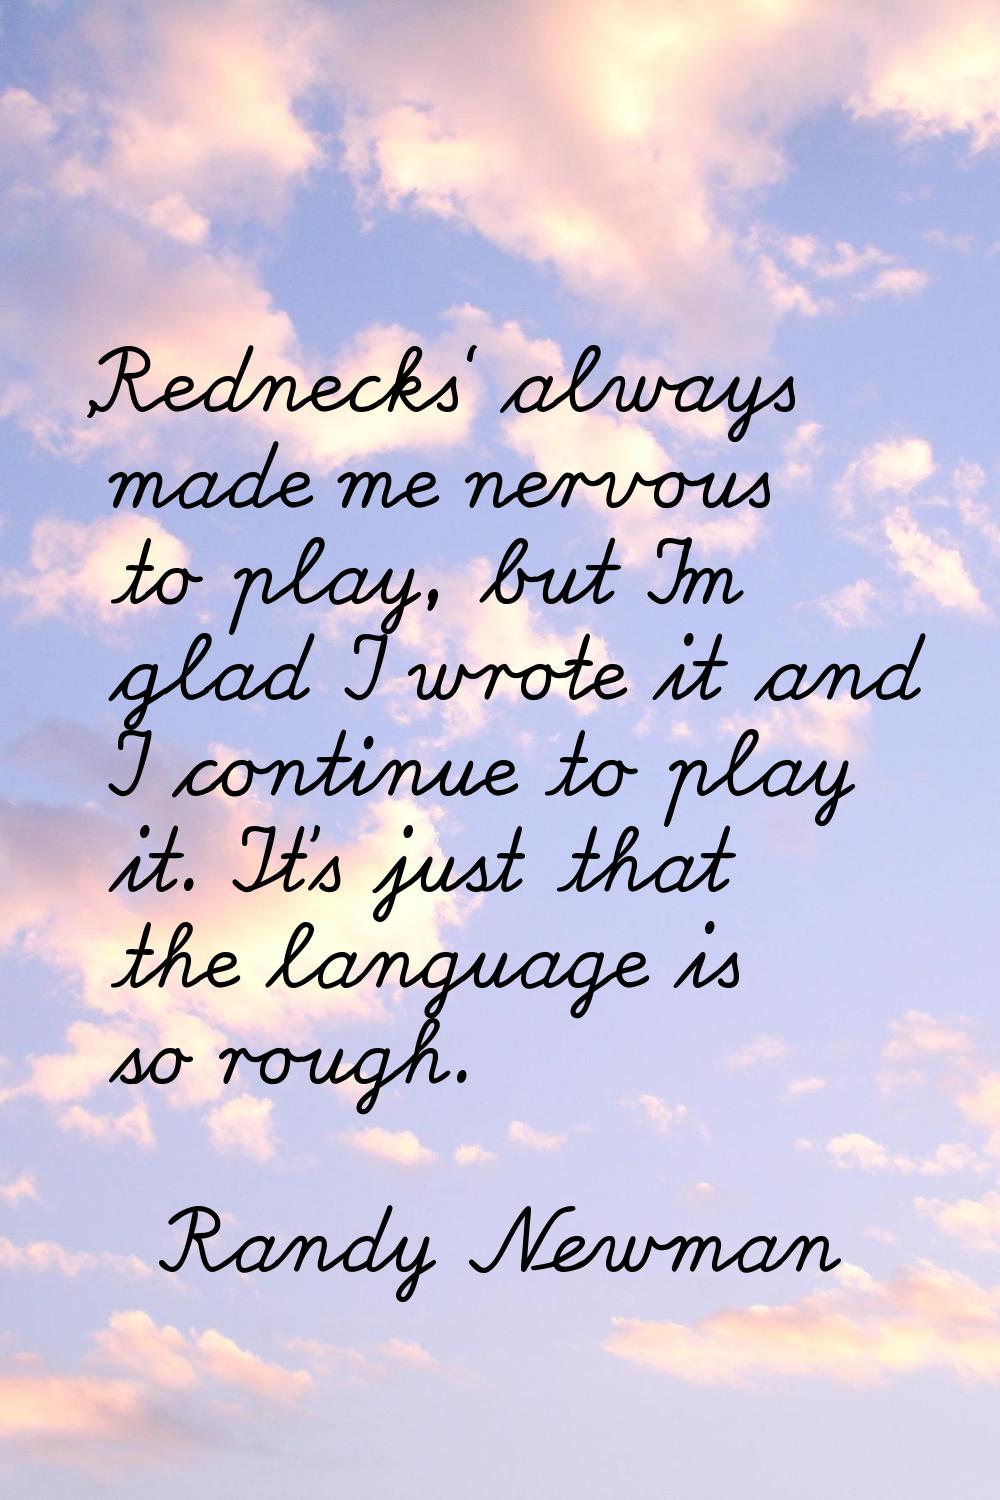 'Rednecks' always made me nervous to play, but I'm glad I wrote it and I continue to play it. It's 